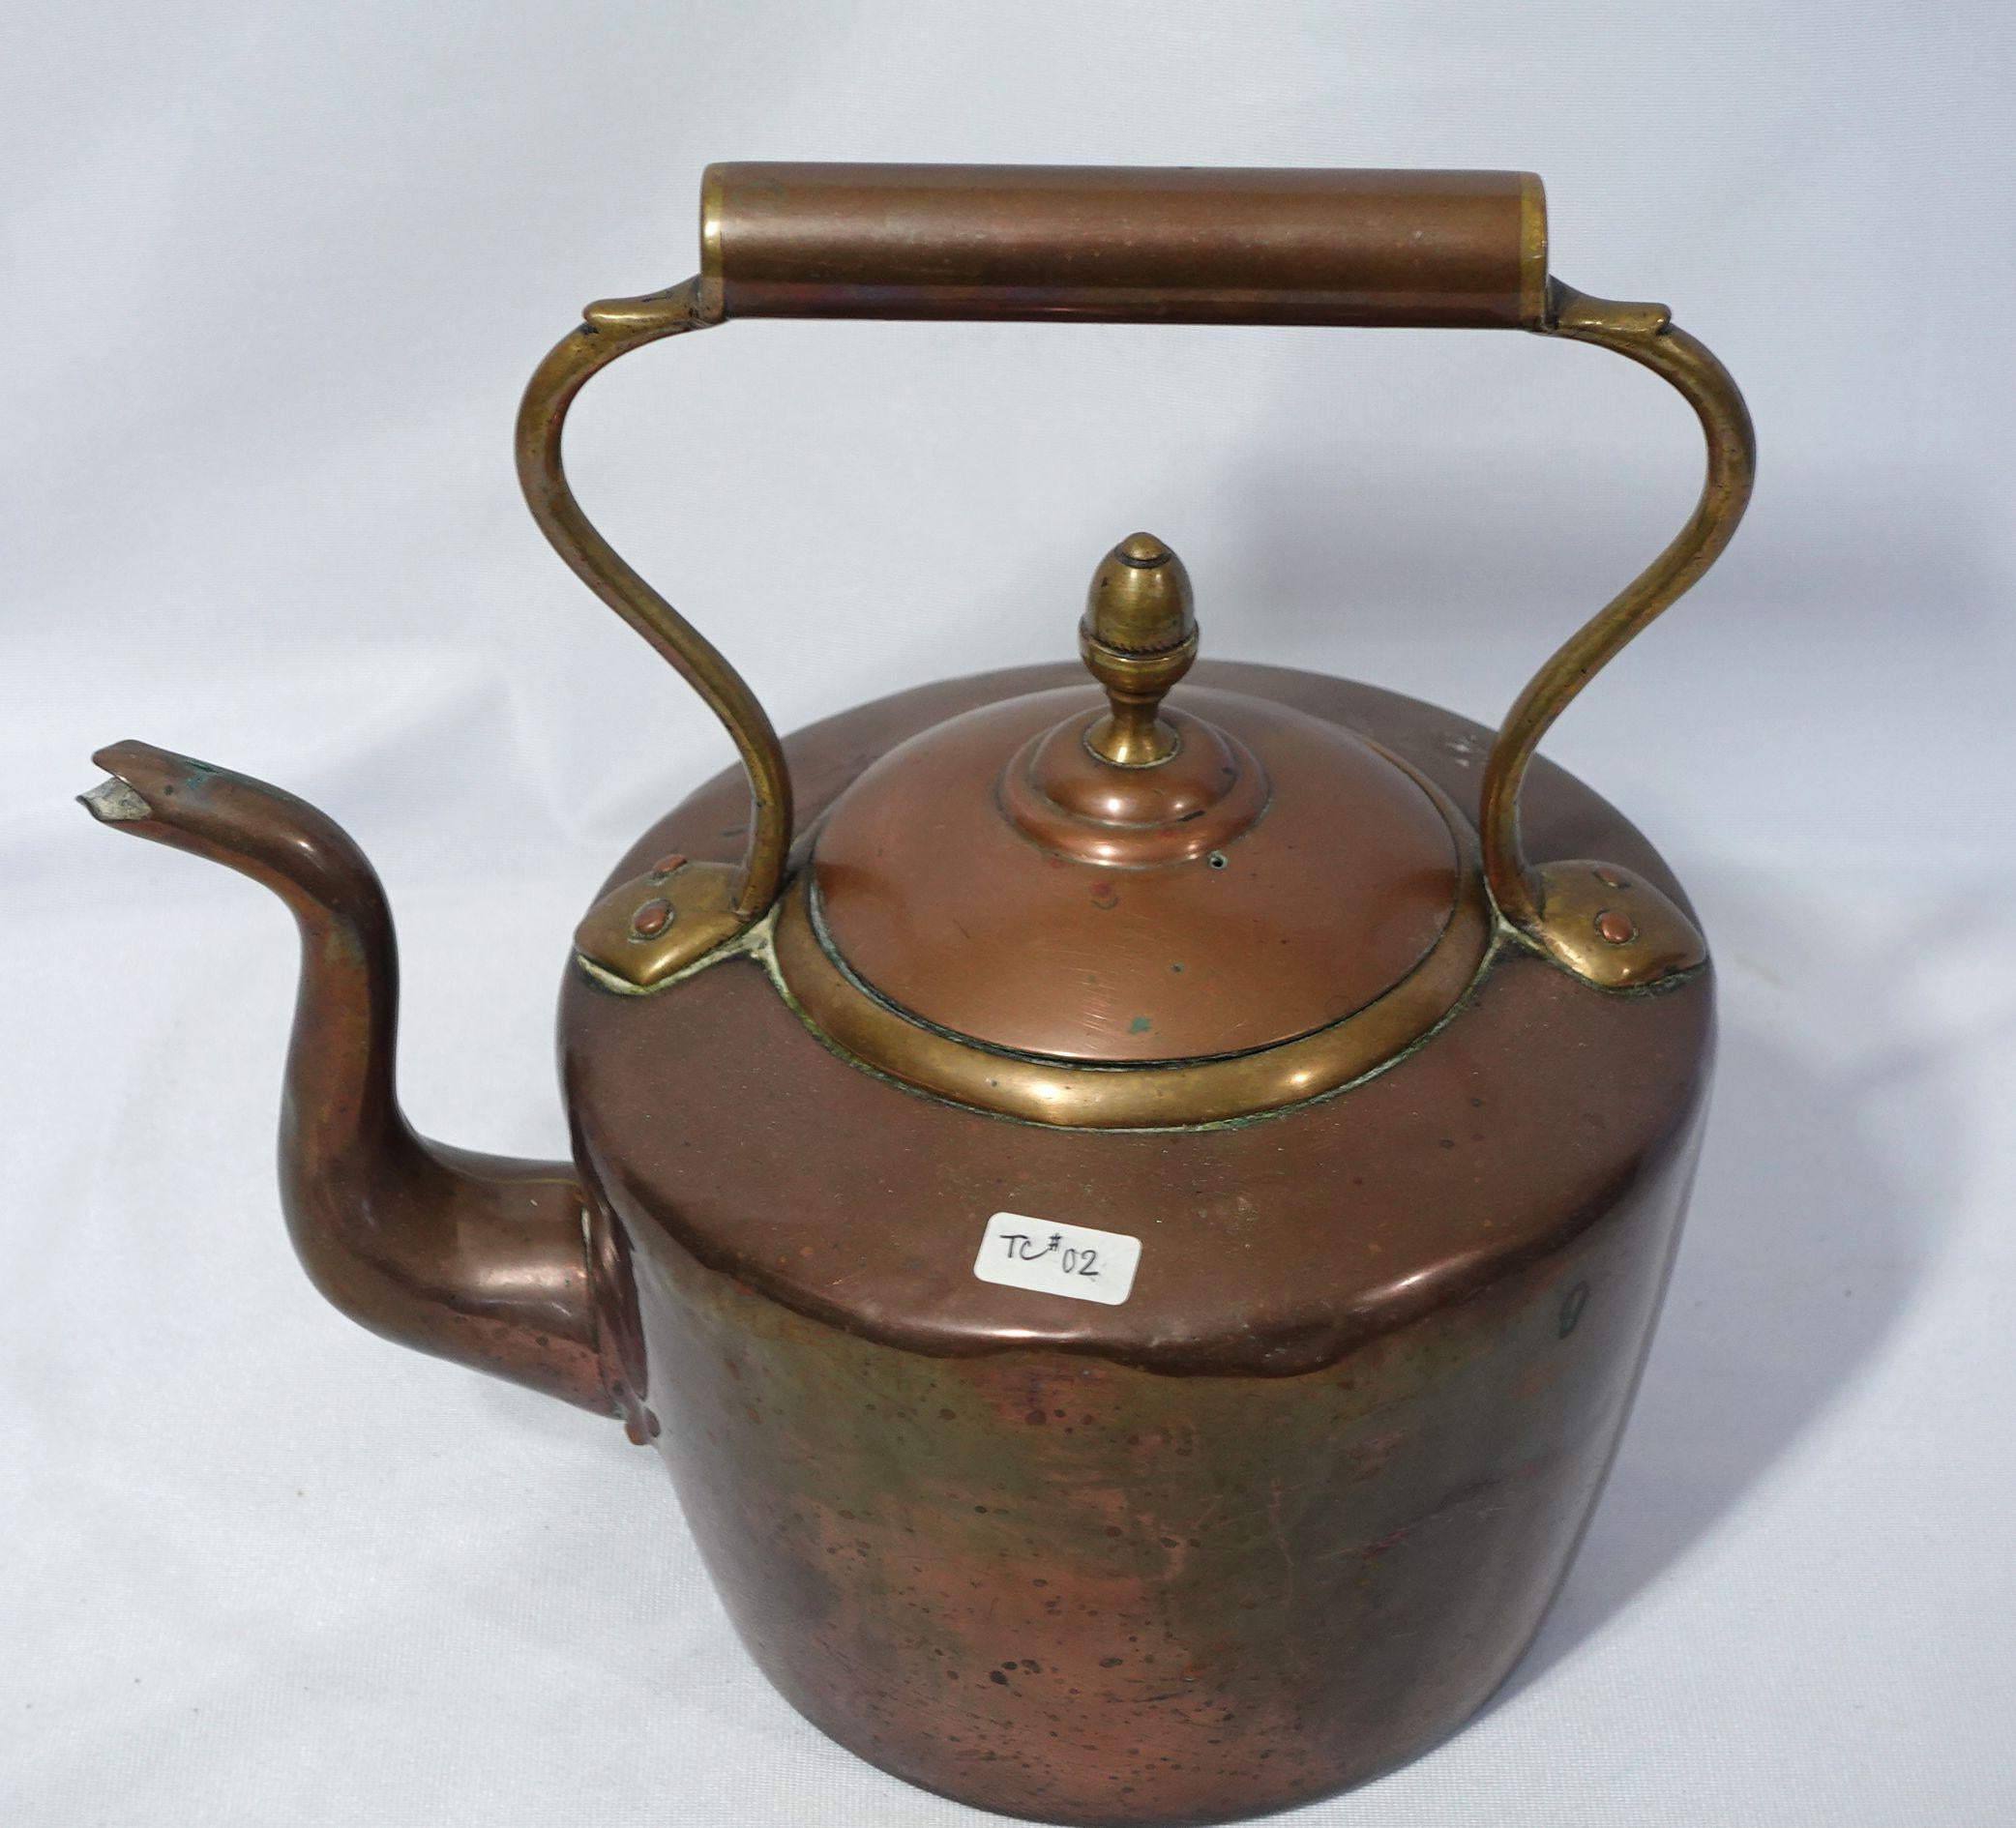 Hand-hammered a large and heavy copper tea kettle made in England from the 19th century, very well hand-made with delicate craftsmanship, and highly collectible antique.
